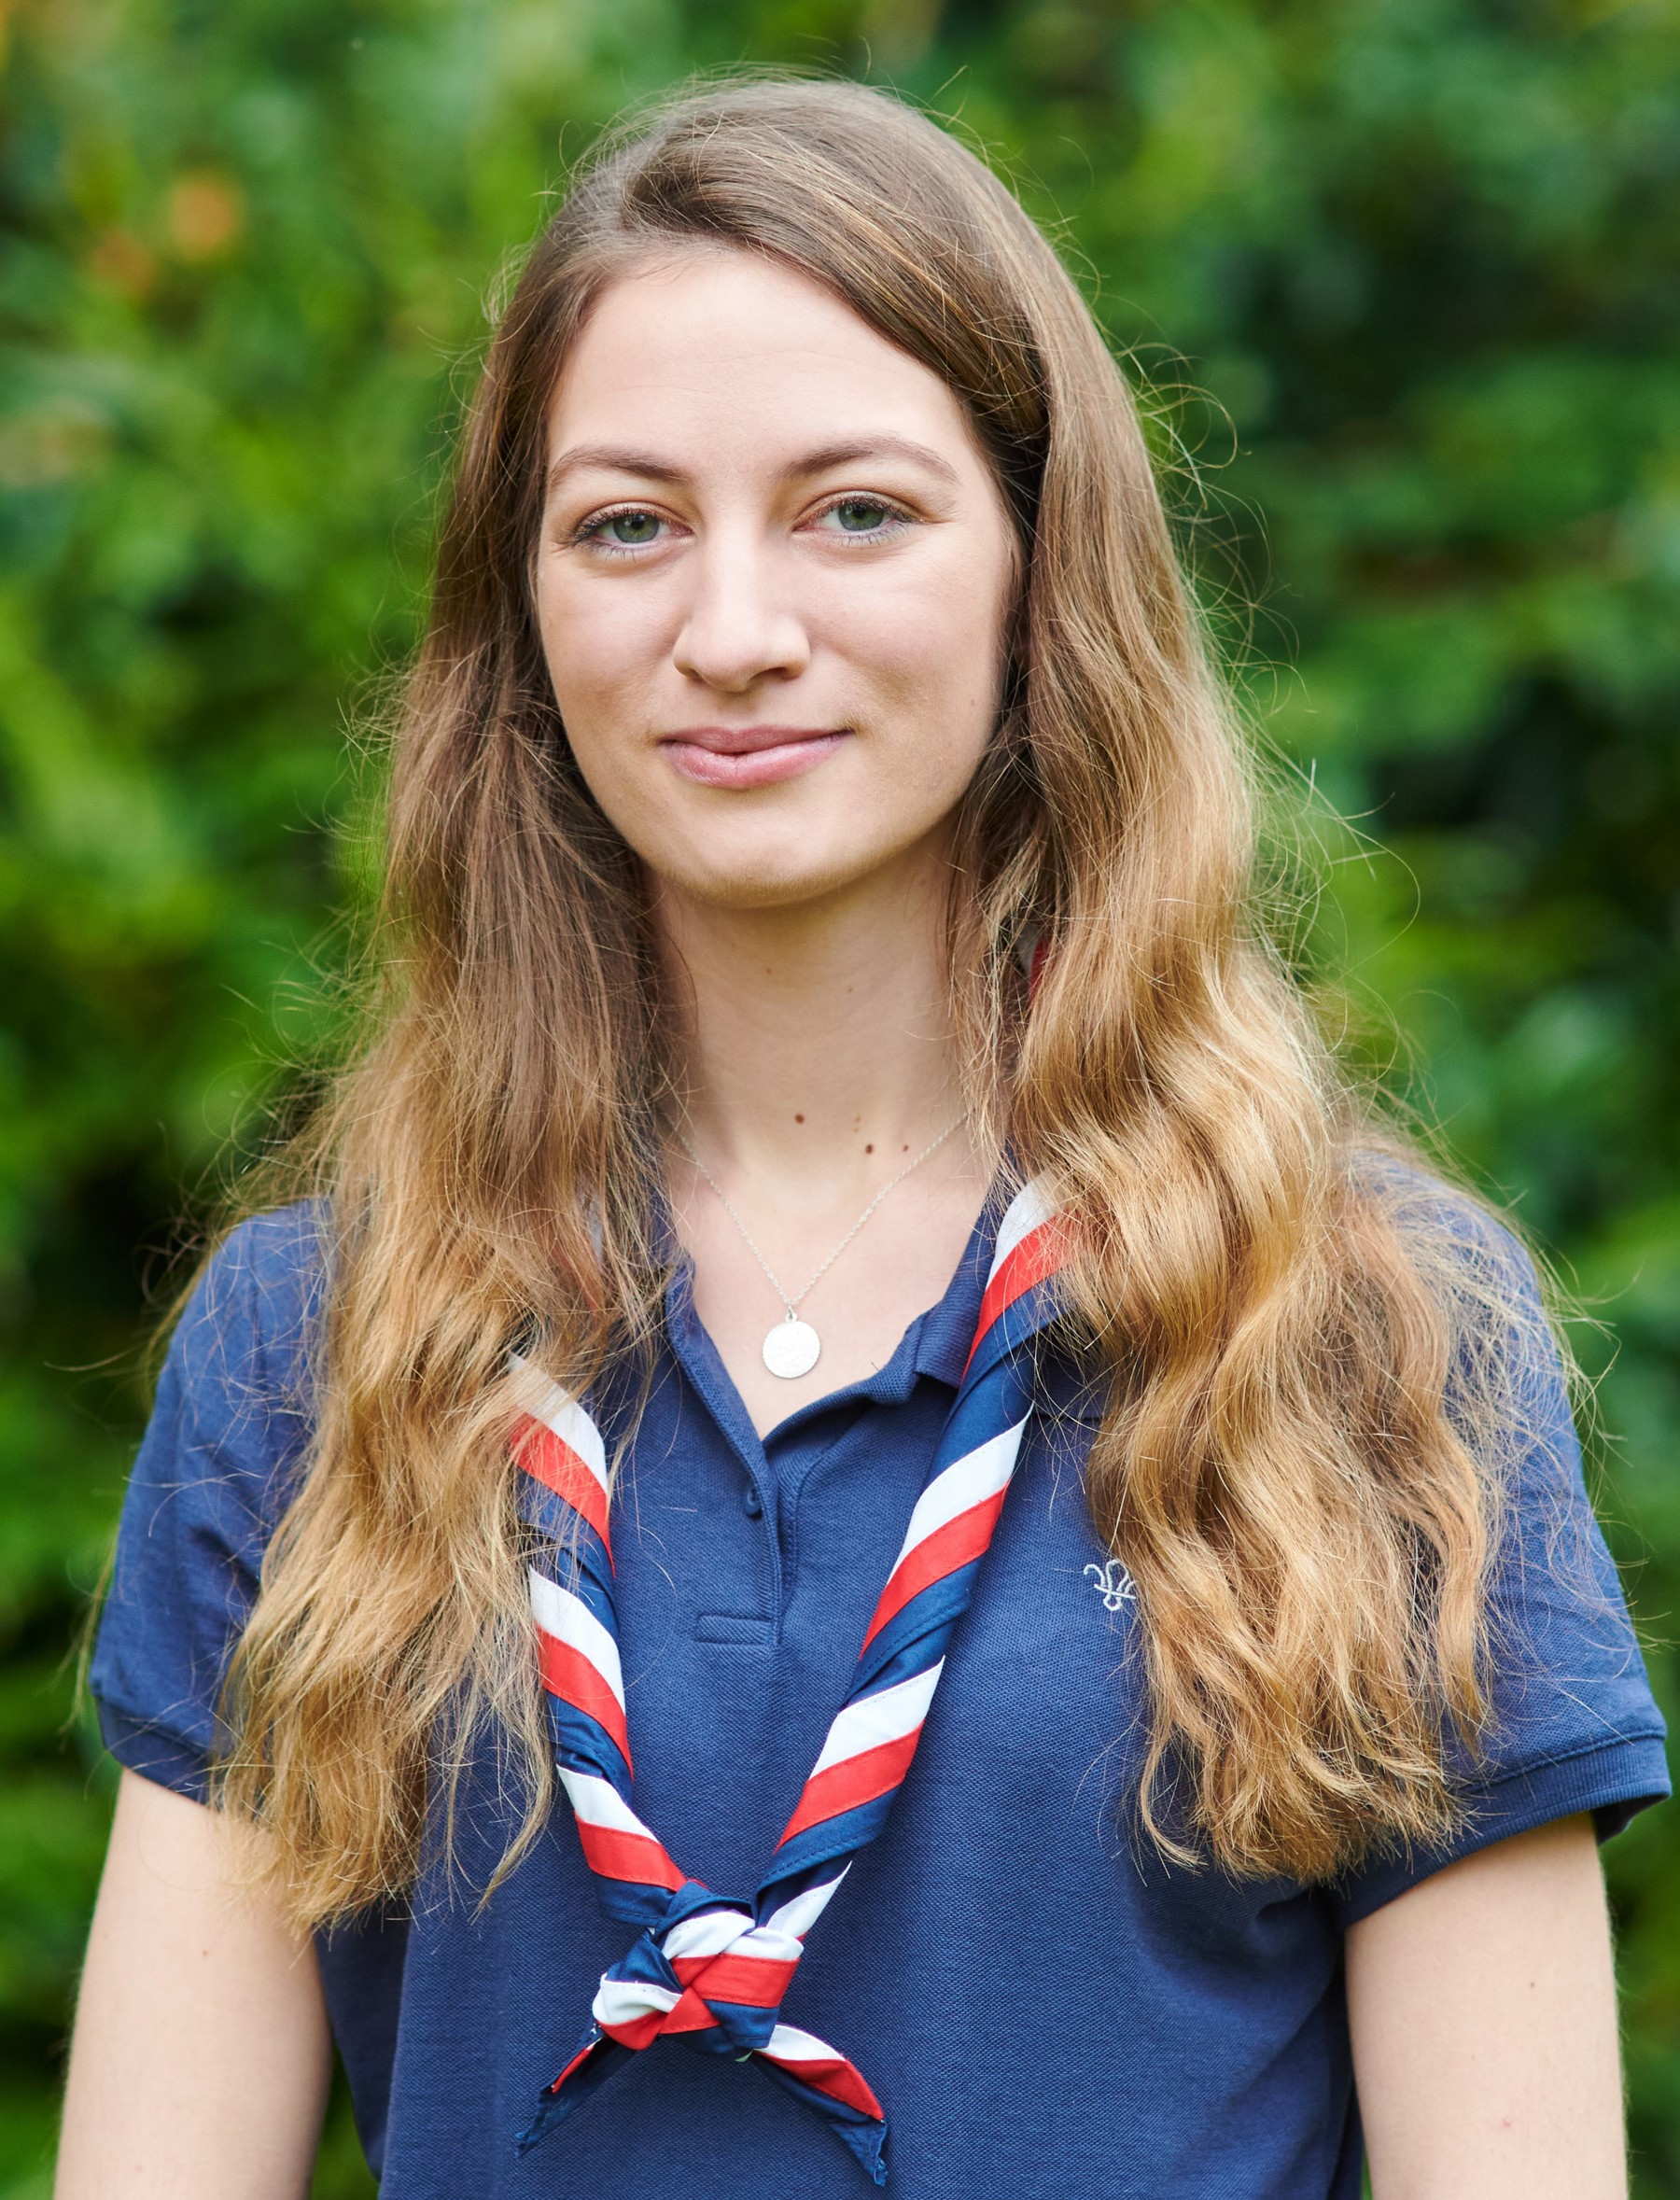 Rhiannon Wells smiling at the camera while wearing a navy Scouts polo shirt and stripy scarf